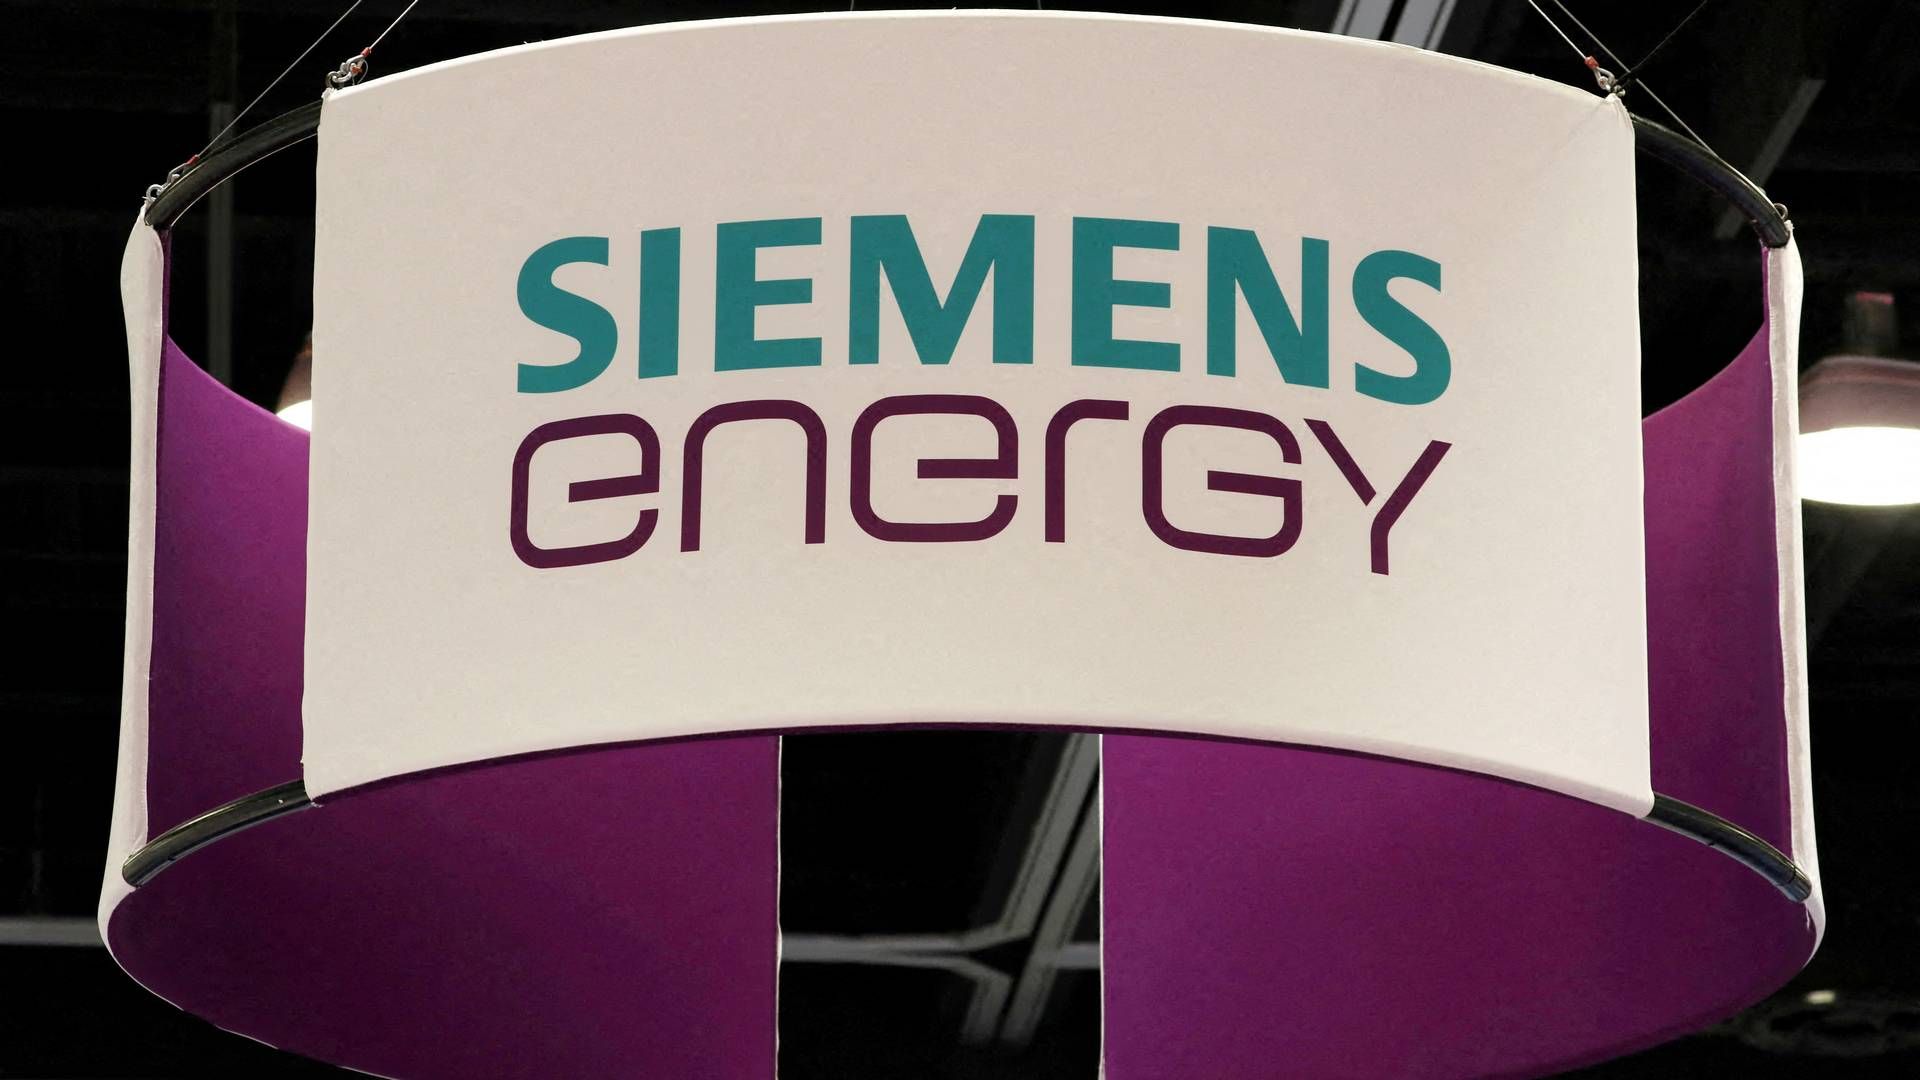 The guarantees were not expected until Siemens Energy’s annual report on Wednesday. | Photo: Chris Helgren